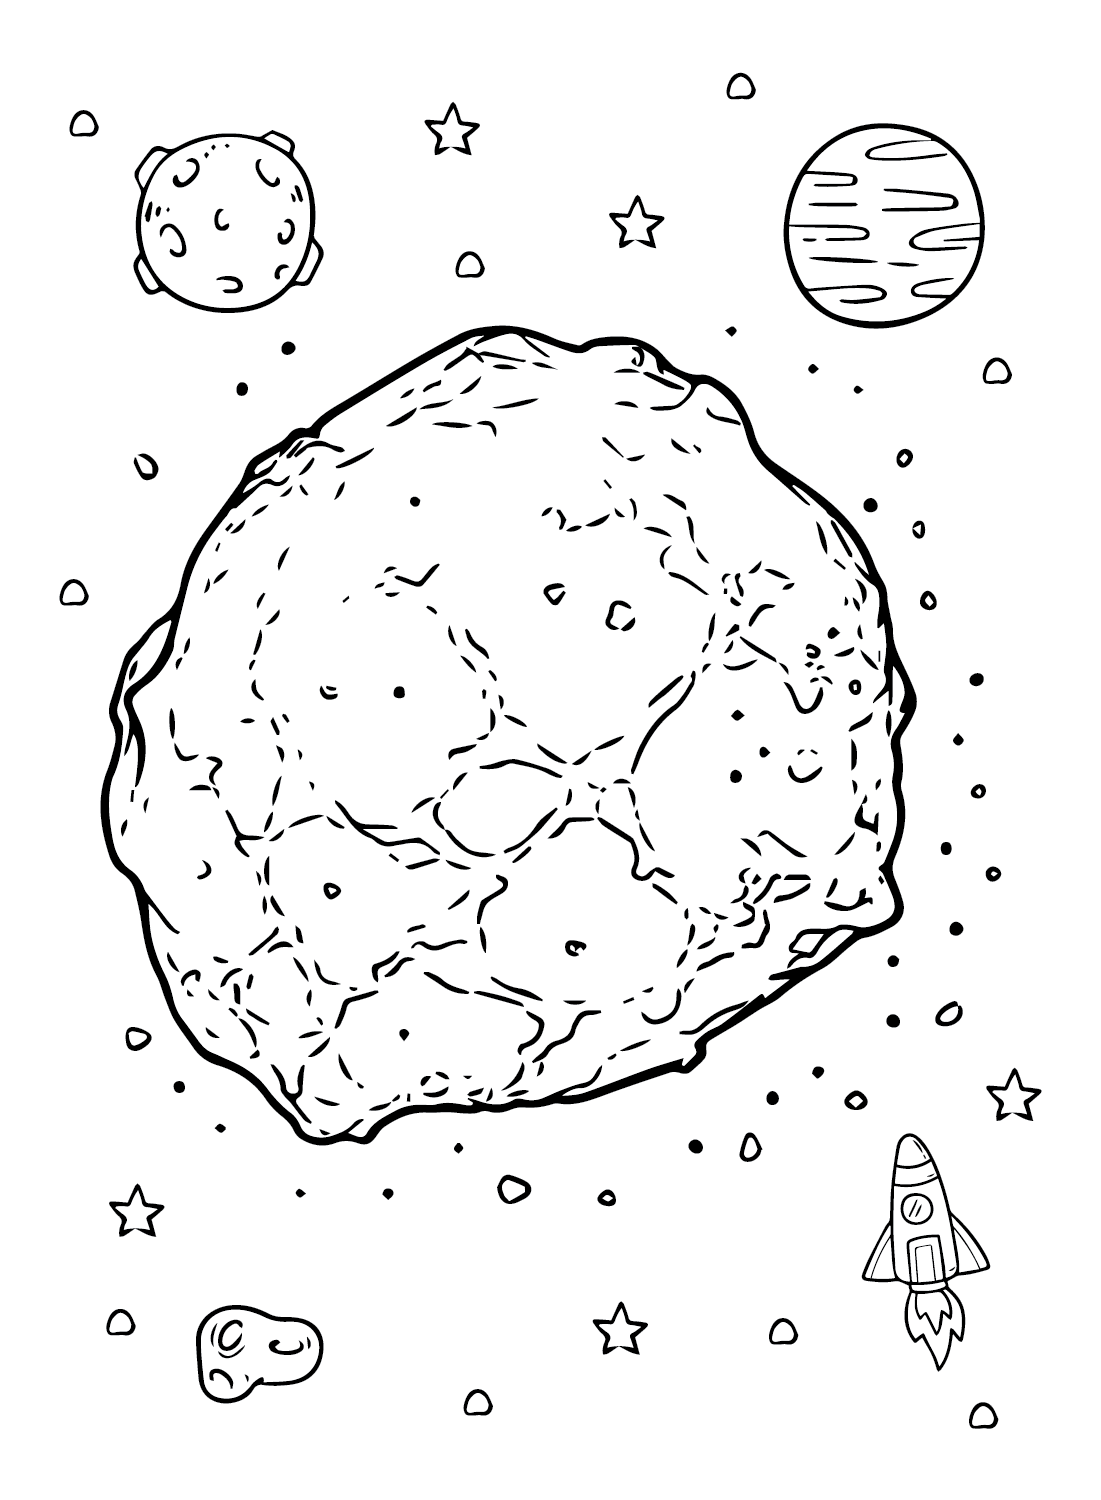 Asteroid coloring pages